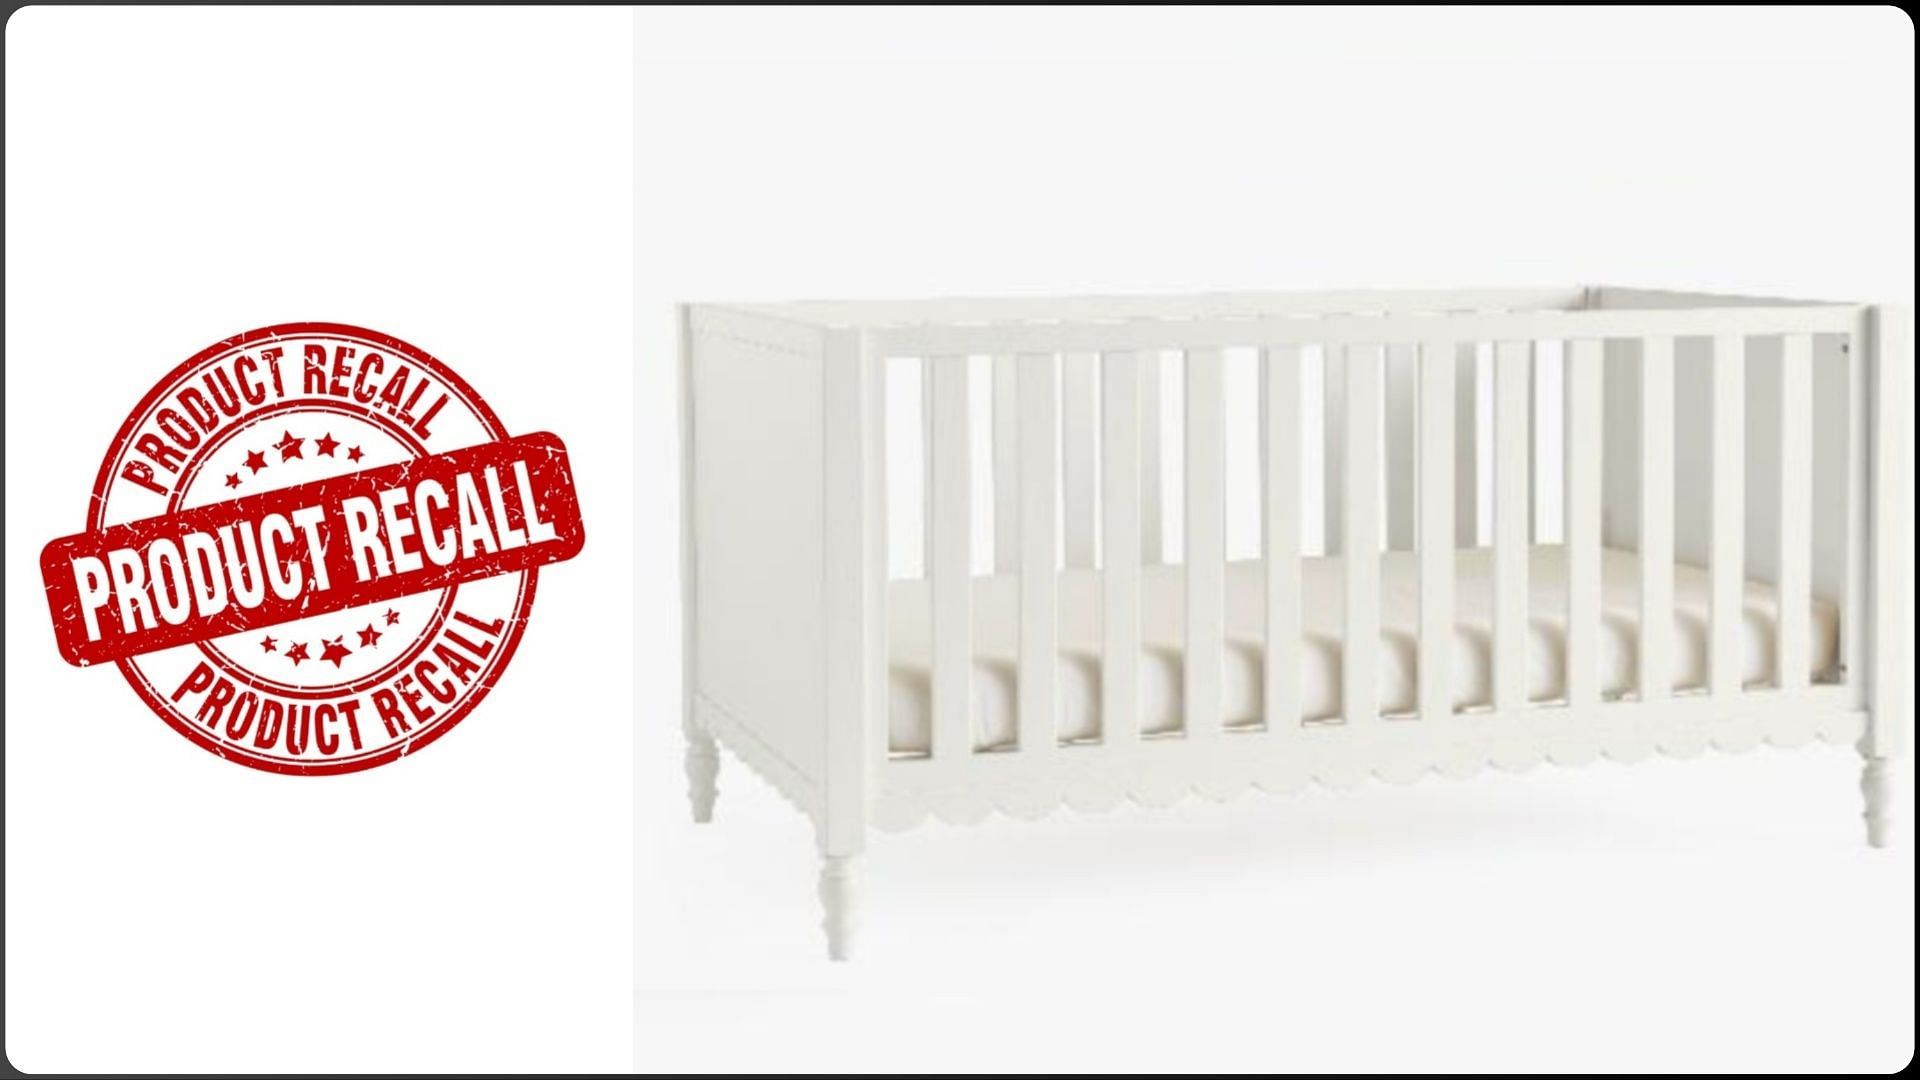 Pottery Barn Kids recalls Penny Convertible Cribs over laceration concerns (Image via CPSC)